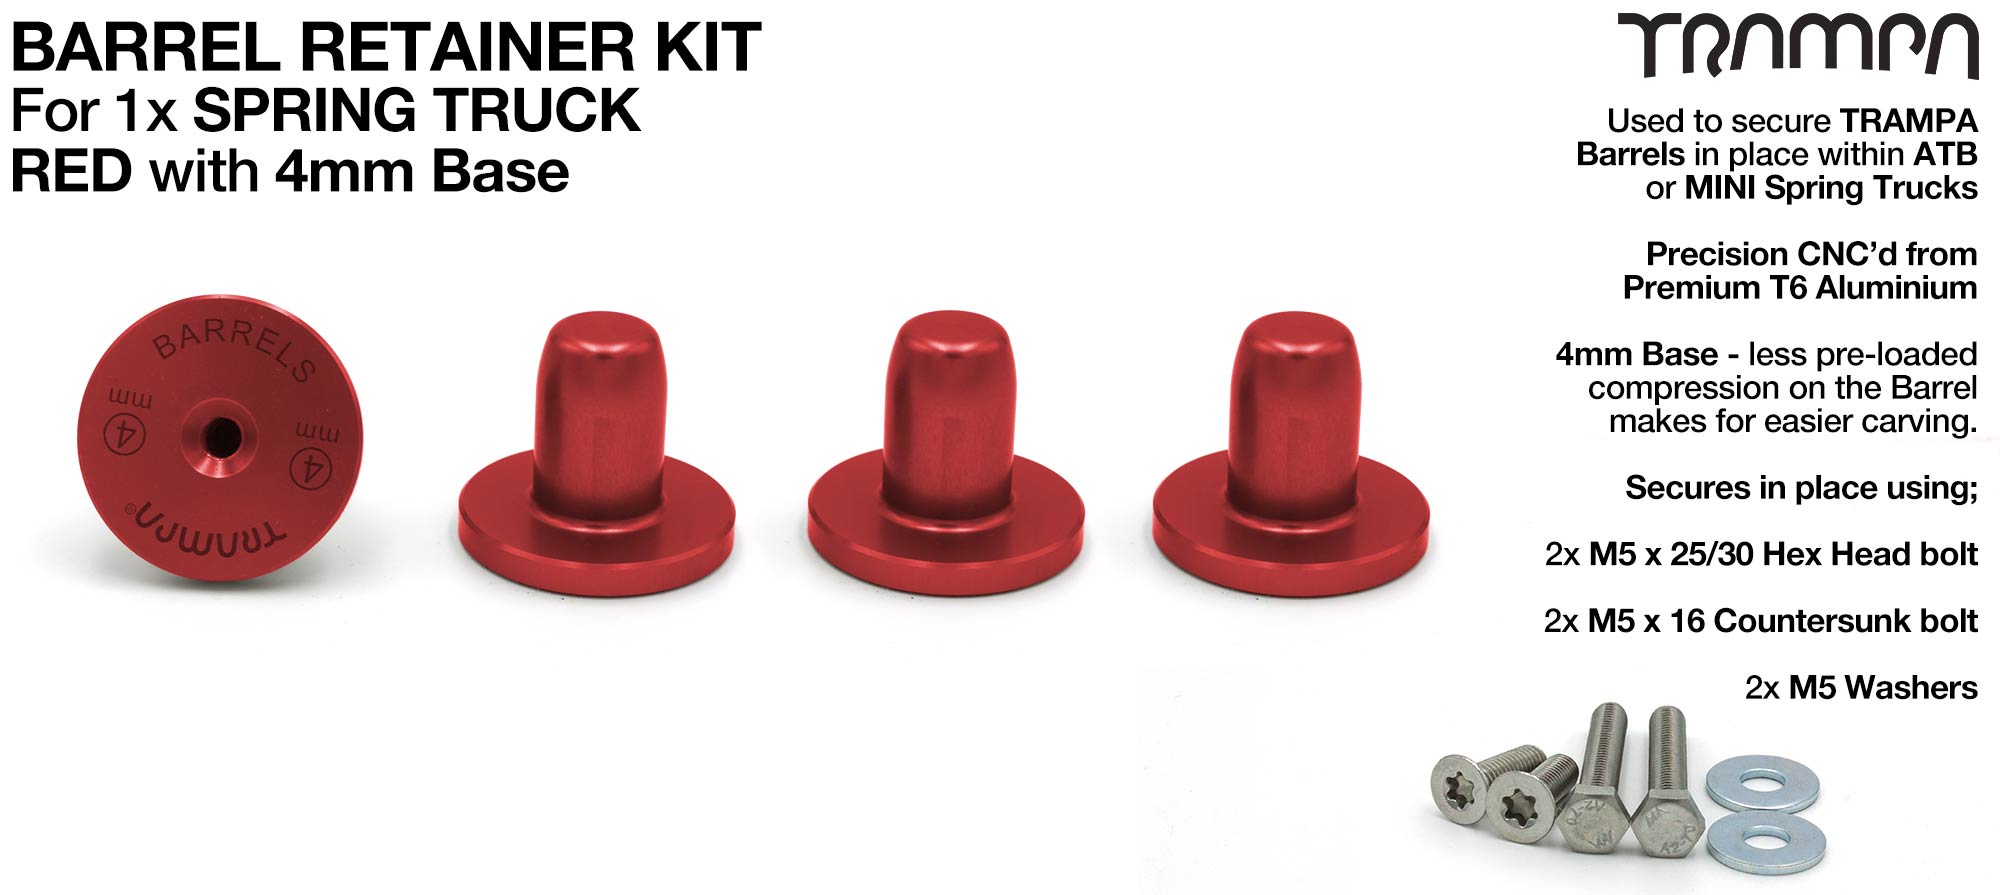 RED Barrel Retainers x4 with 4mm Base